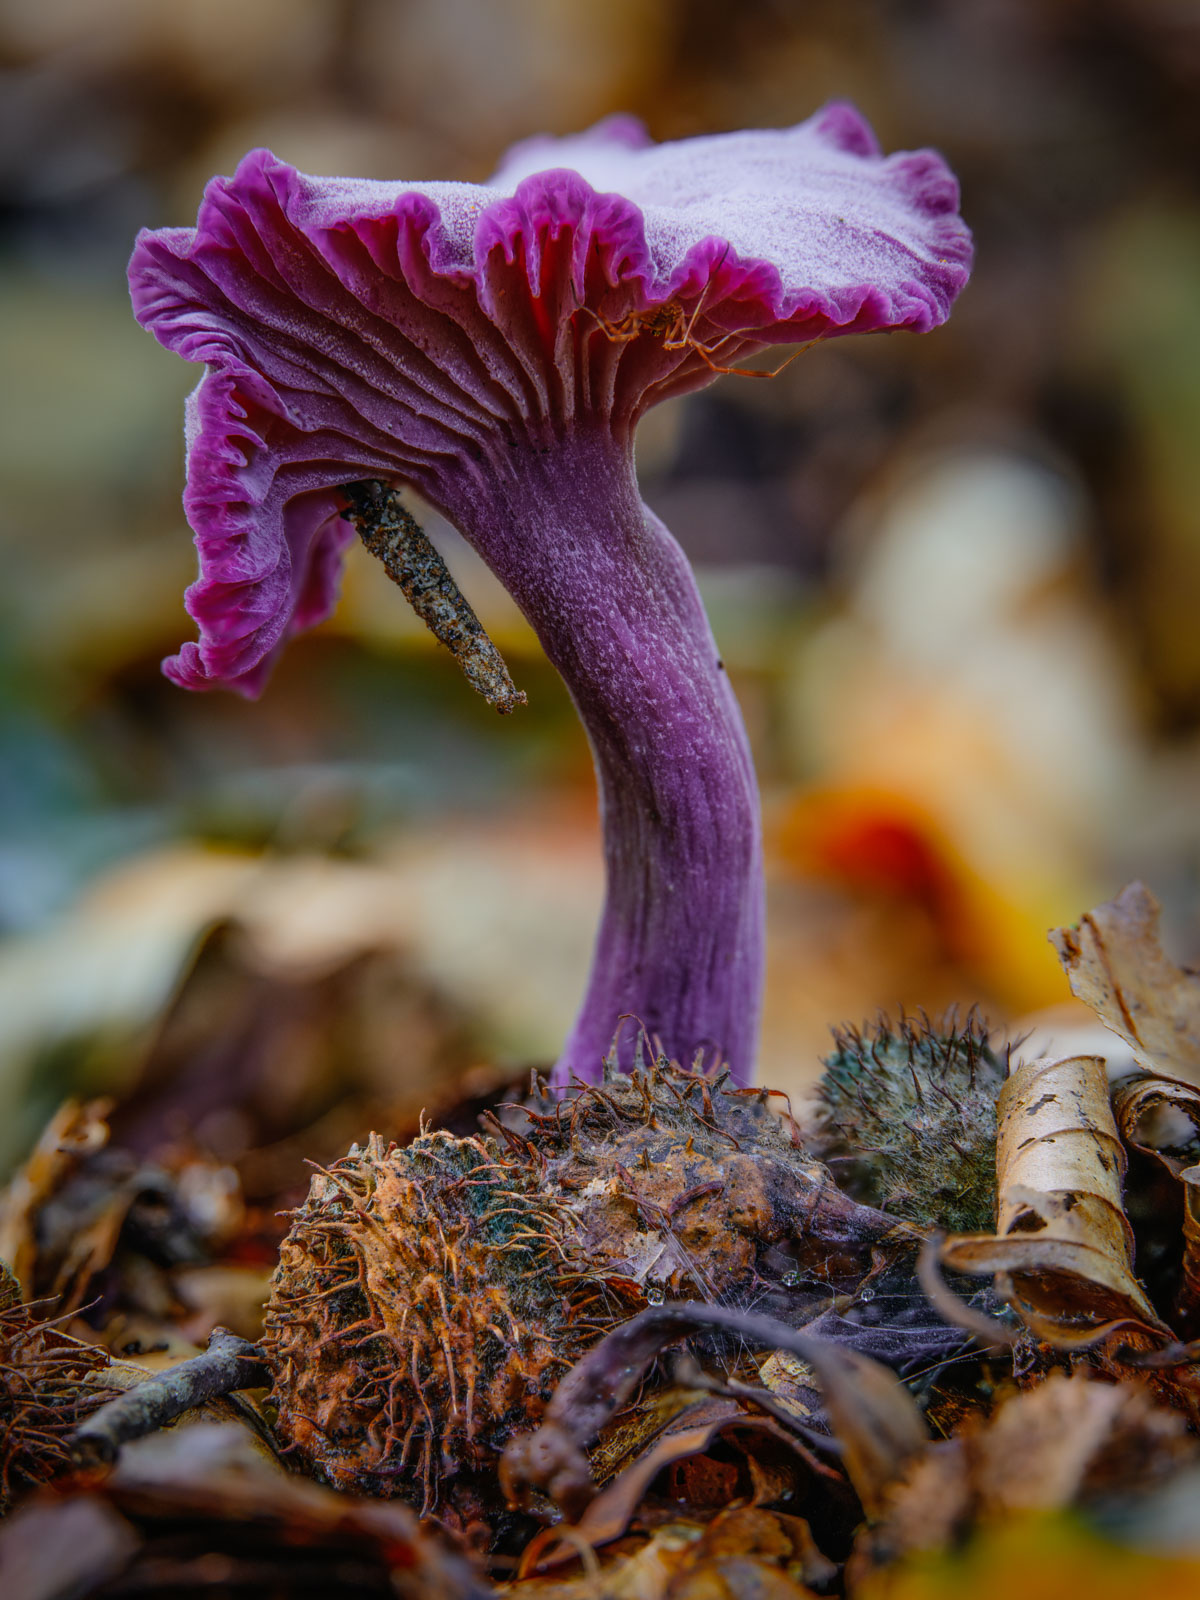 Amethyst deceiver (Laccaria amethystina) in the Teutoburg Forest in late September 2021 (Bielefeld, Germany).